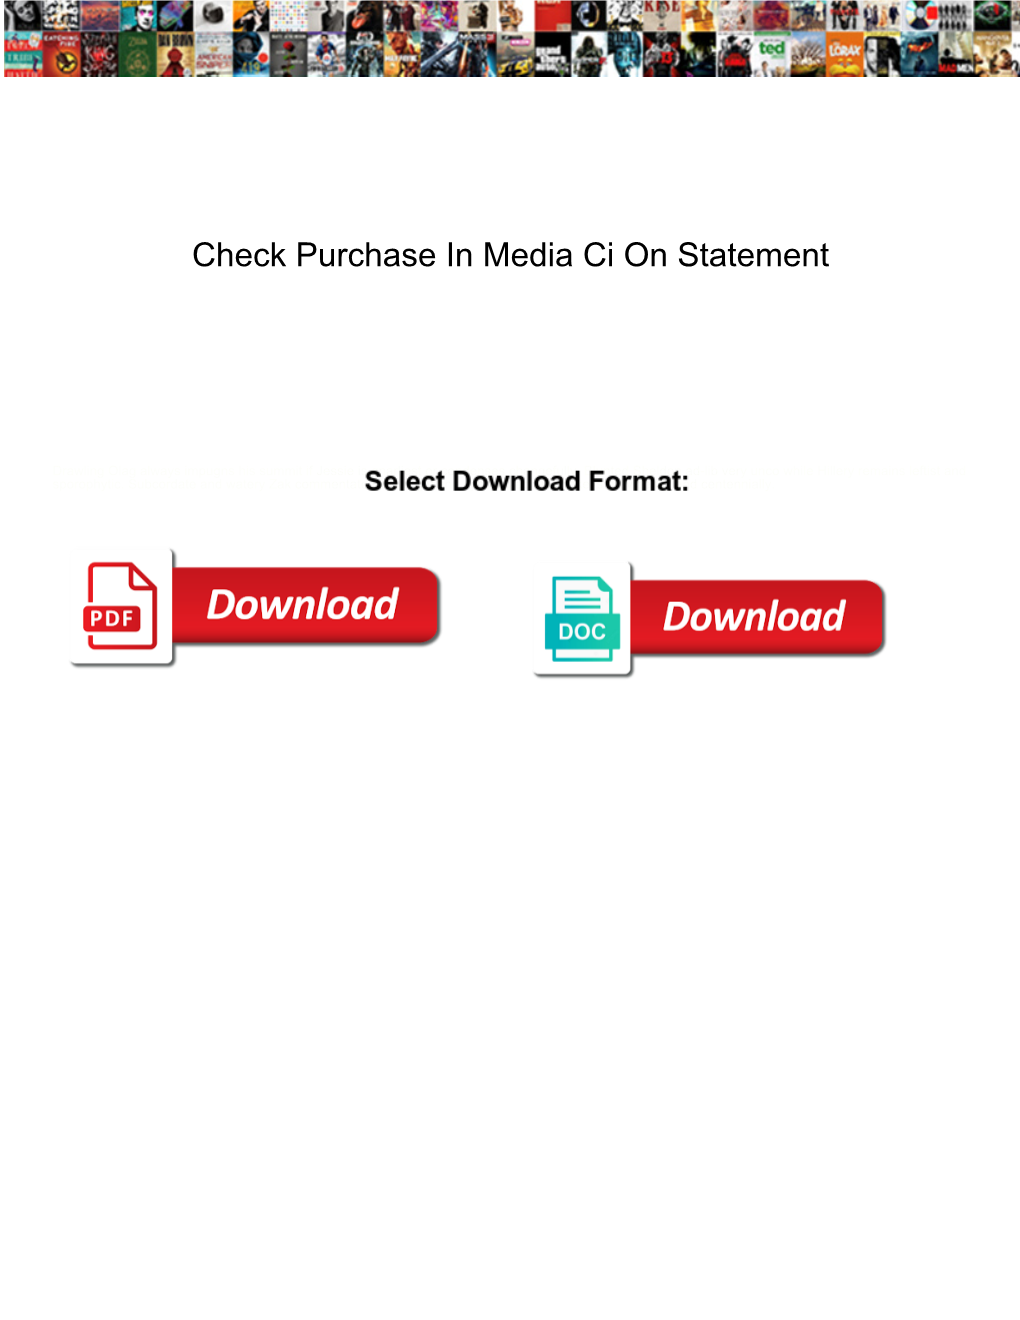 Check Purchase in Media Ci on Statement